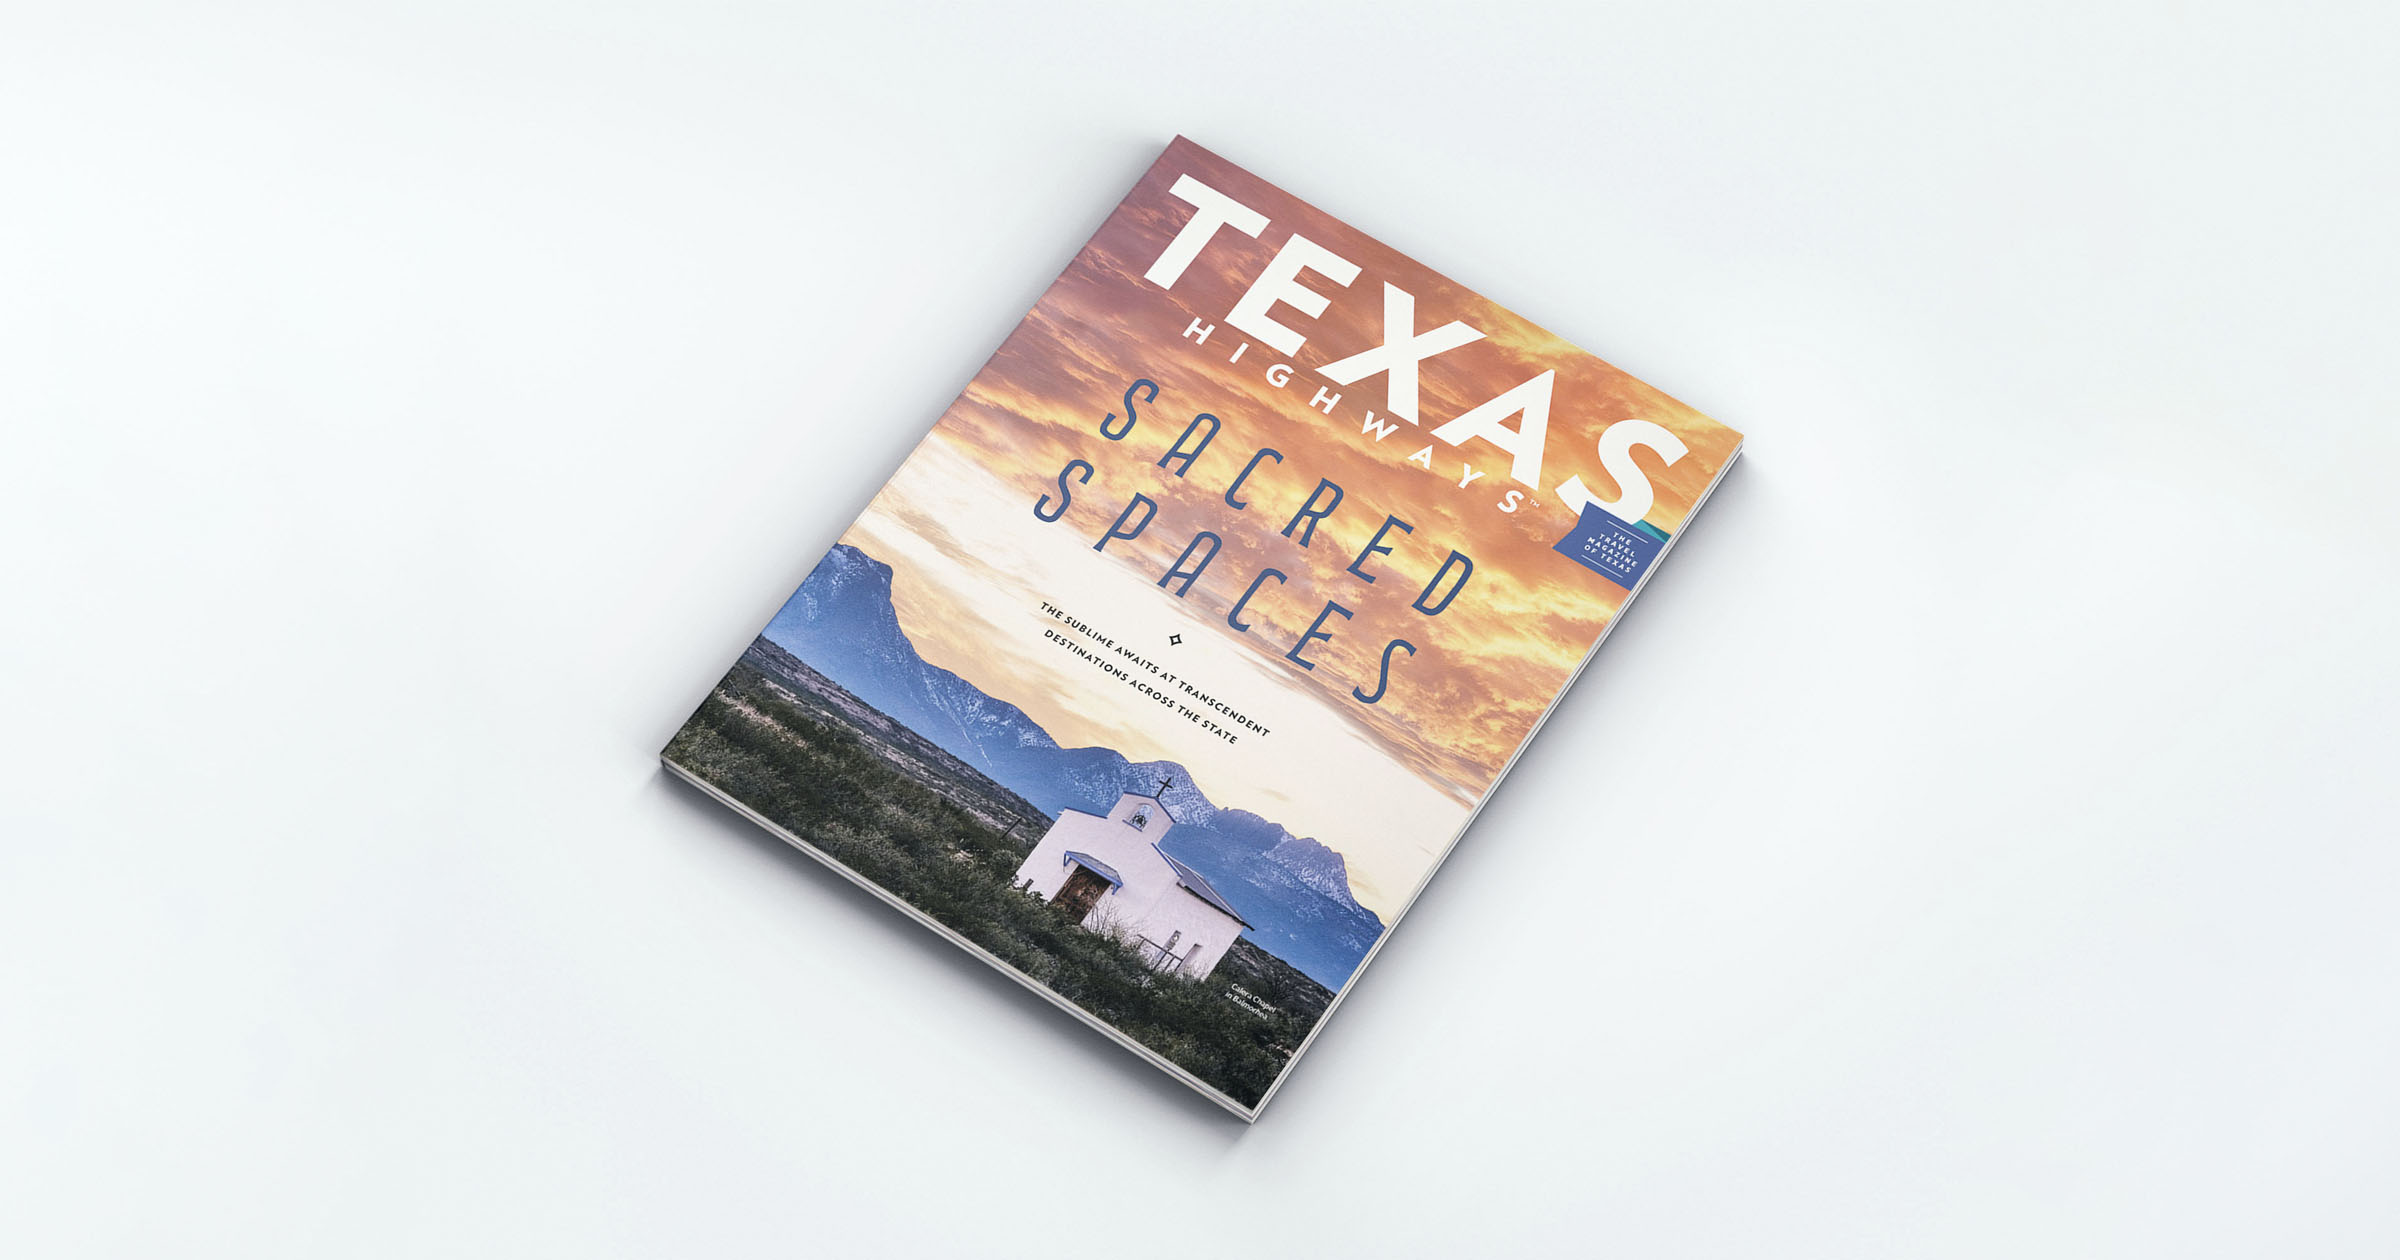 The February 2023 "Sacred Spaces" cover of Texas Highways features a church in the Big Bend area in front of a small mountain range